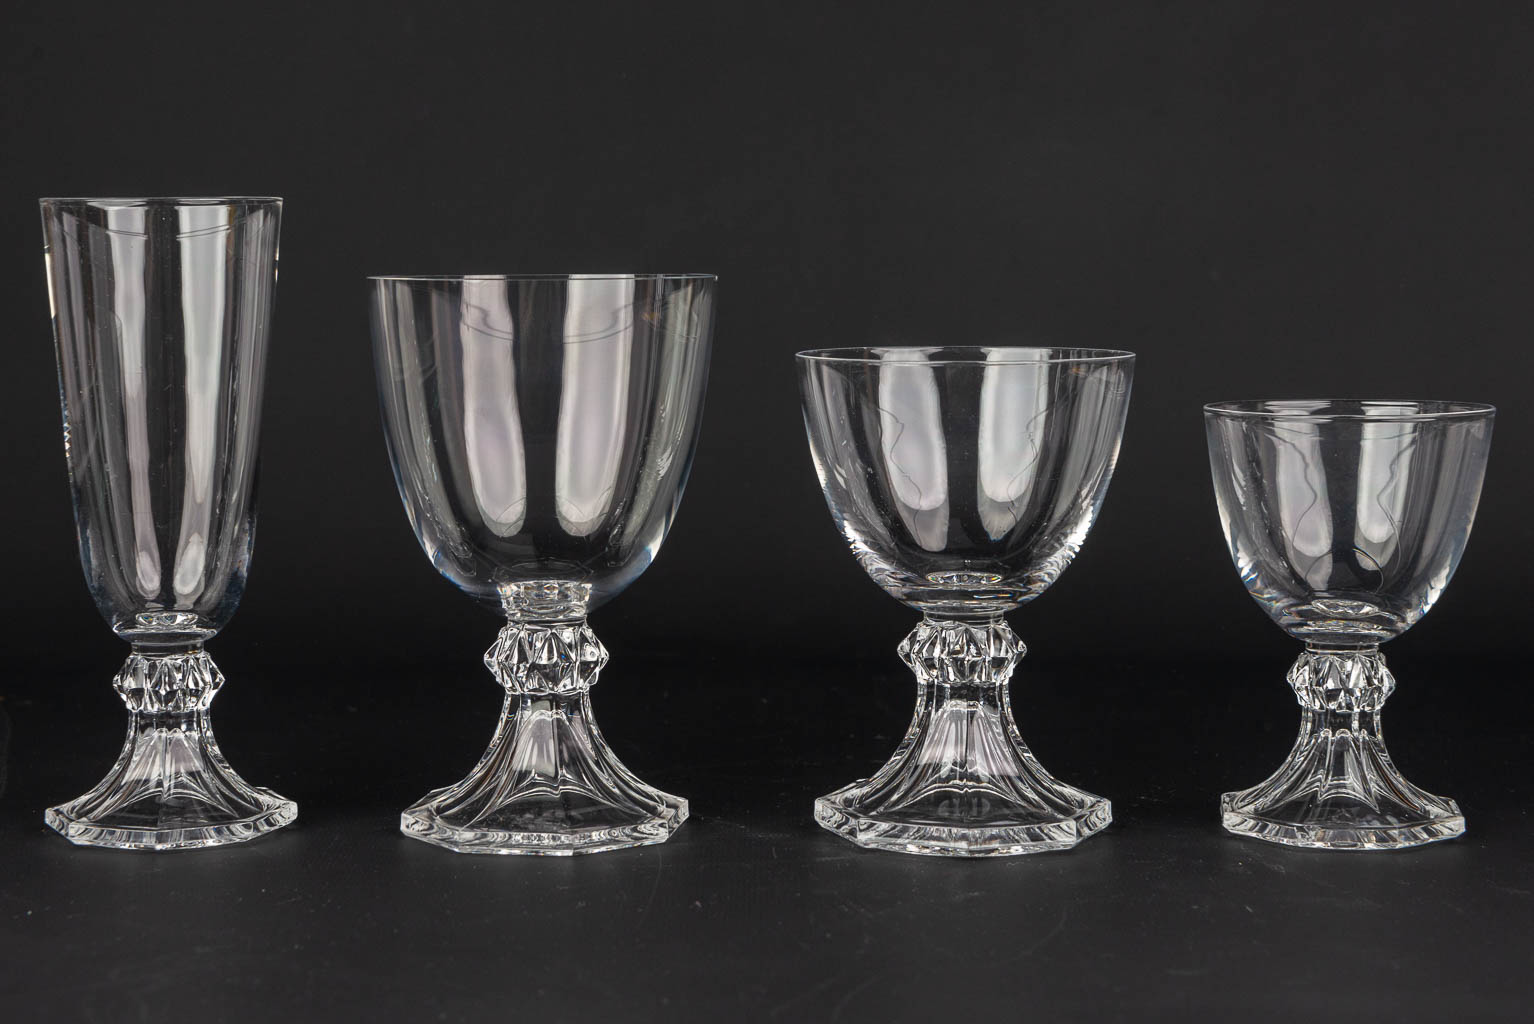 A collection of 31 glasses made by Val Saint-Lambert. (H:16,3cm)